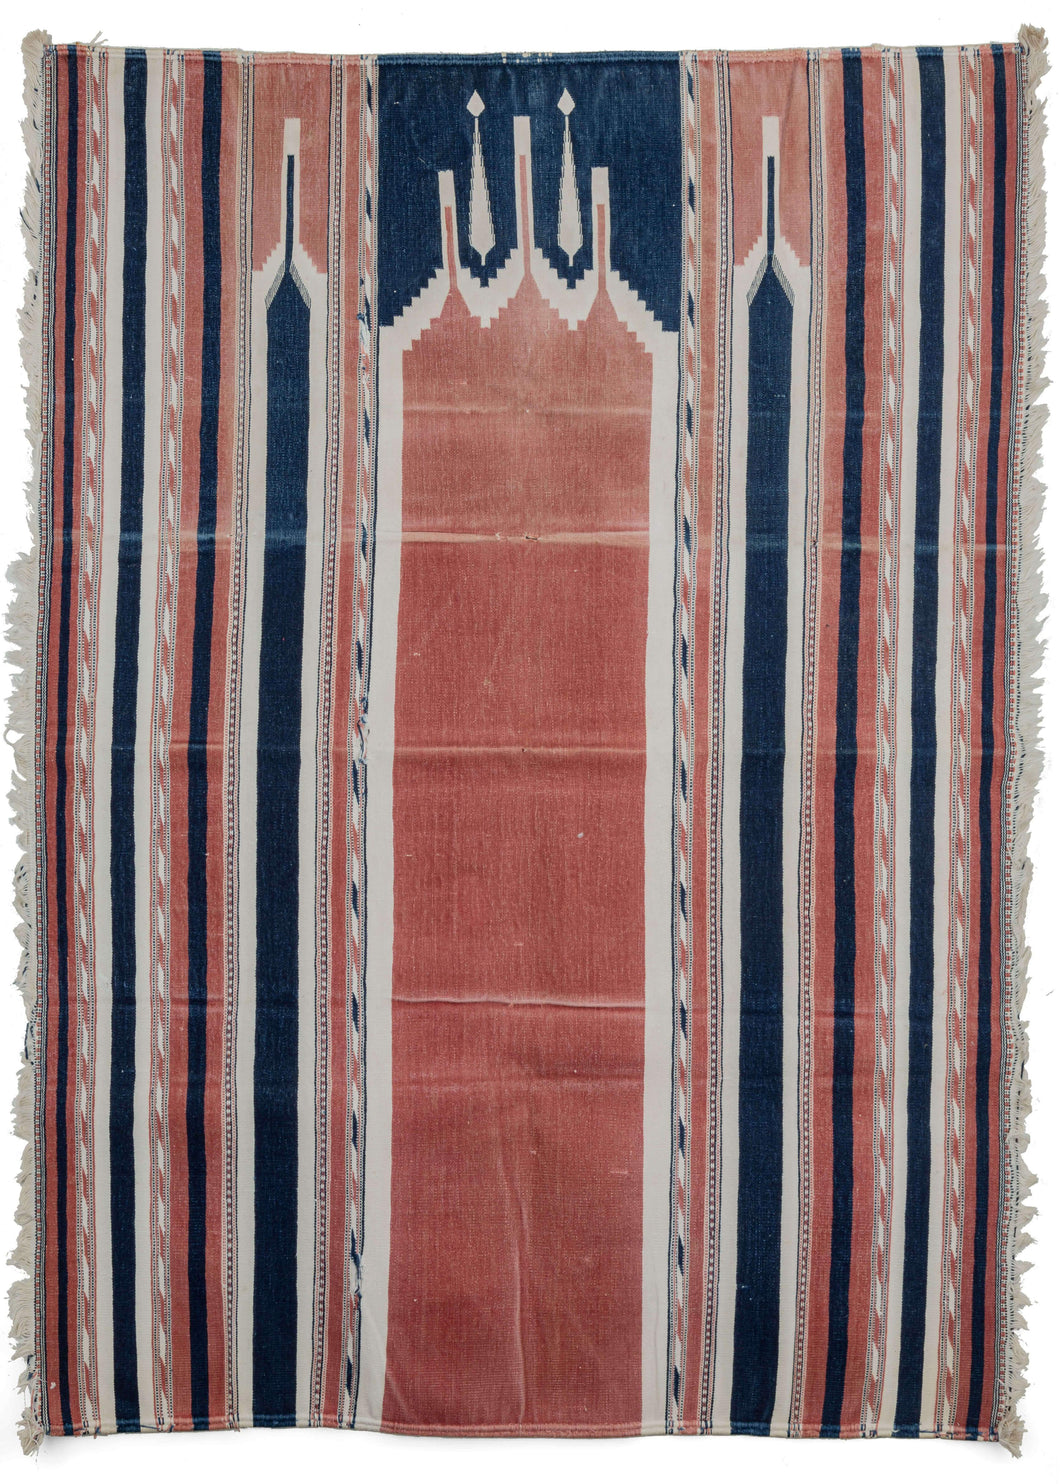 Antique Prayer Dhurrie that features a simple yet striking design of a prayer rug or 